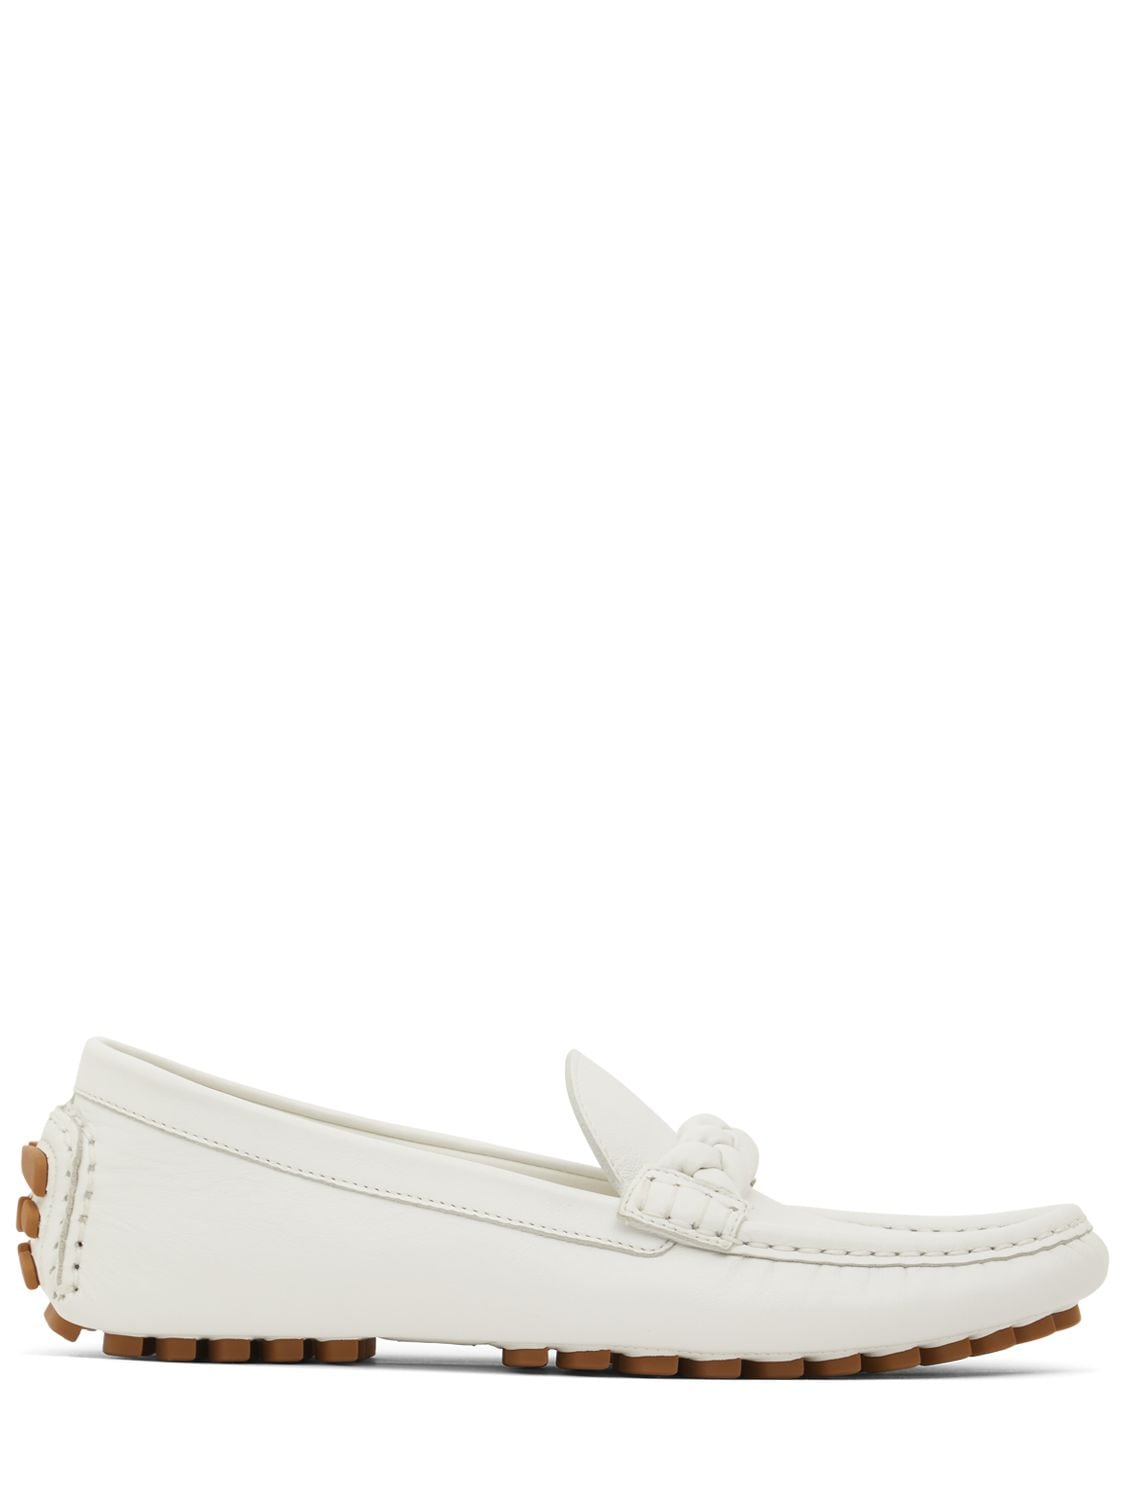 Gianvito Rossi 10mm Monza Leather Loafers In White